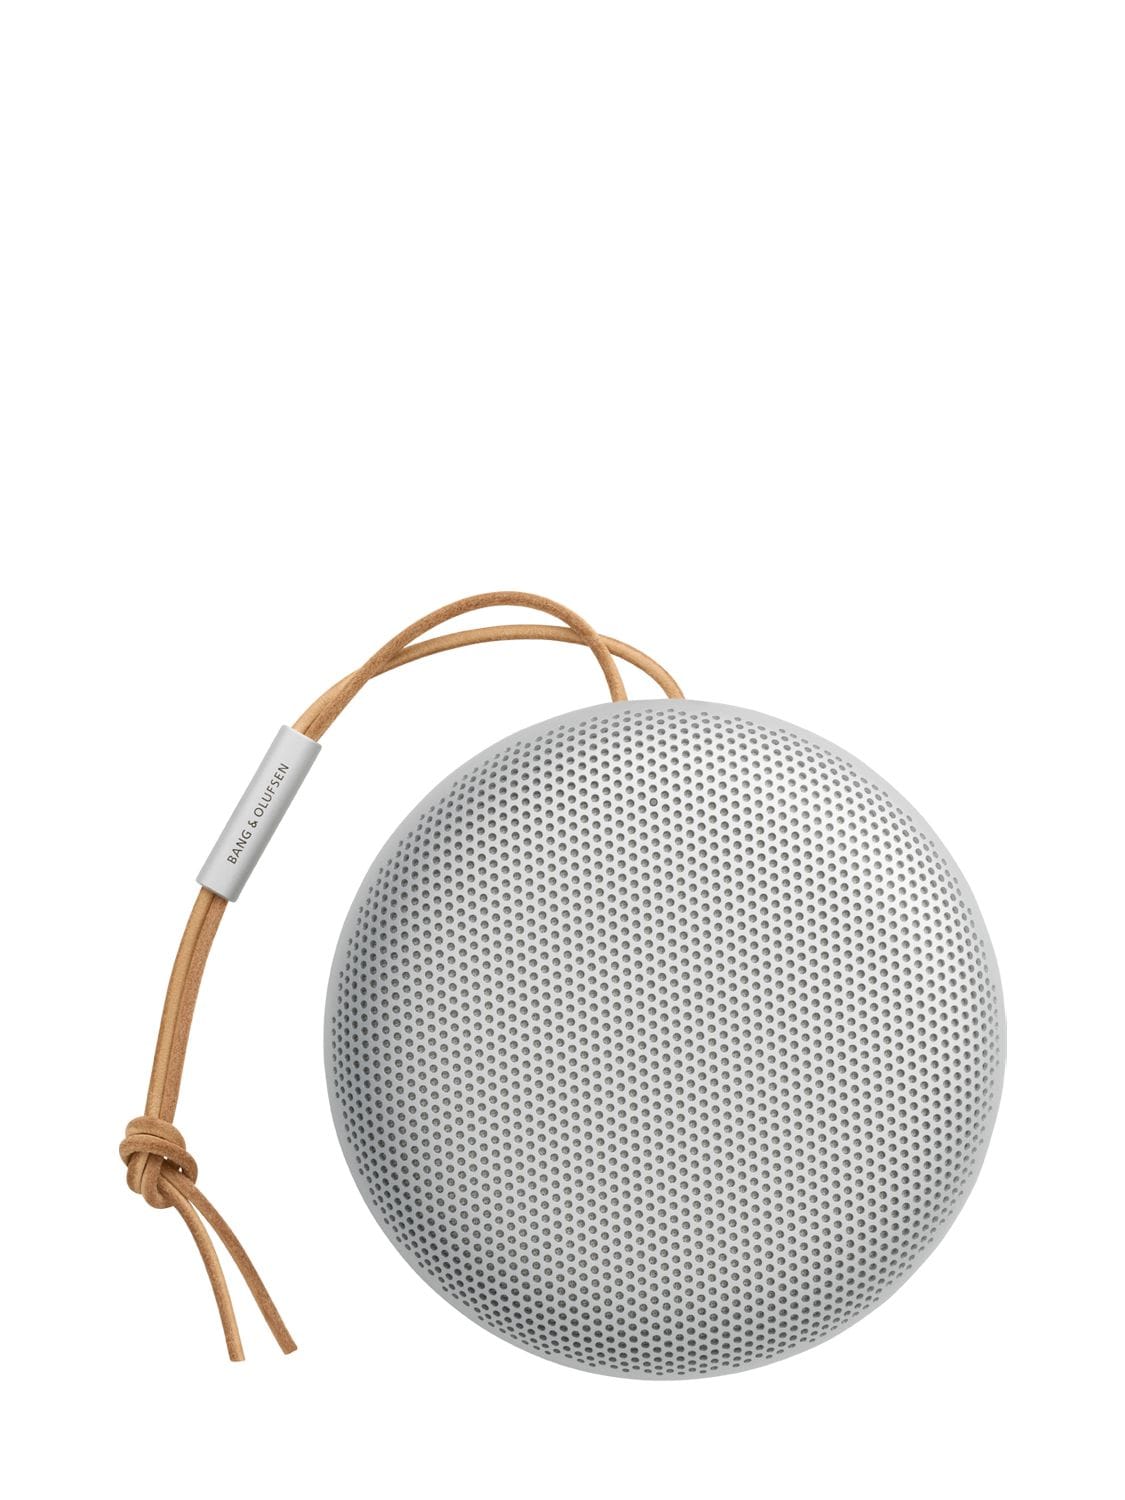 Bang & Olufsen Beoplay A1 2nd Gen Portable Speaker In Grey